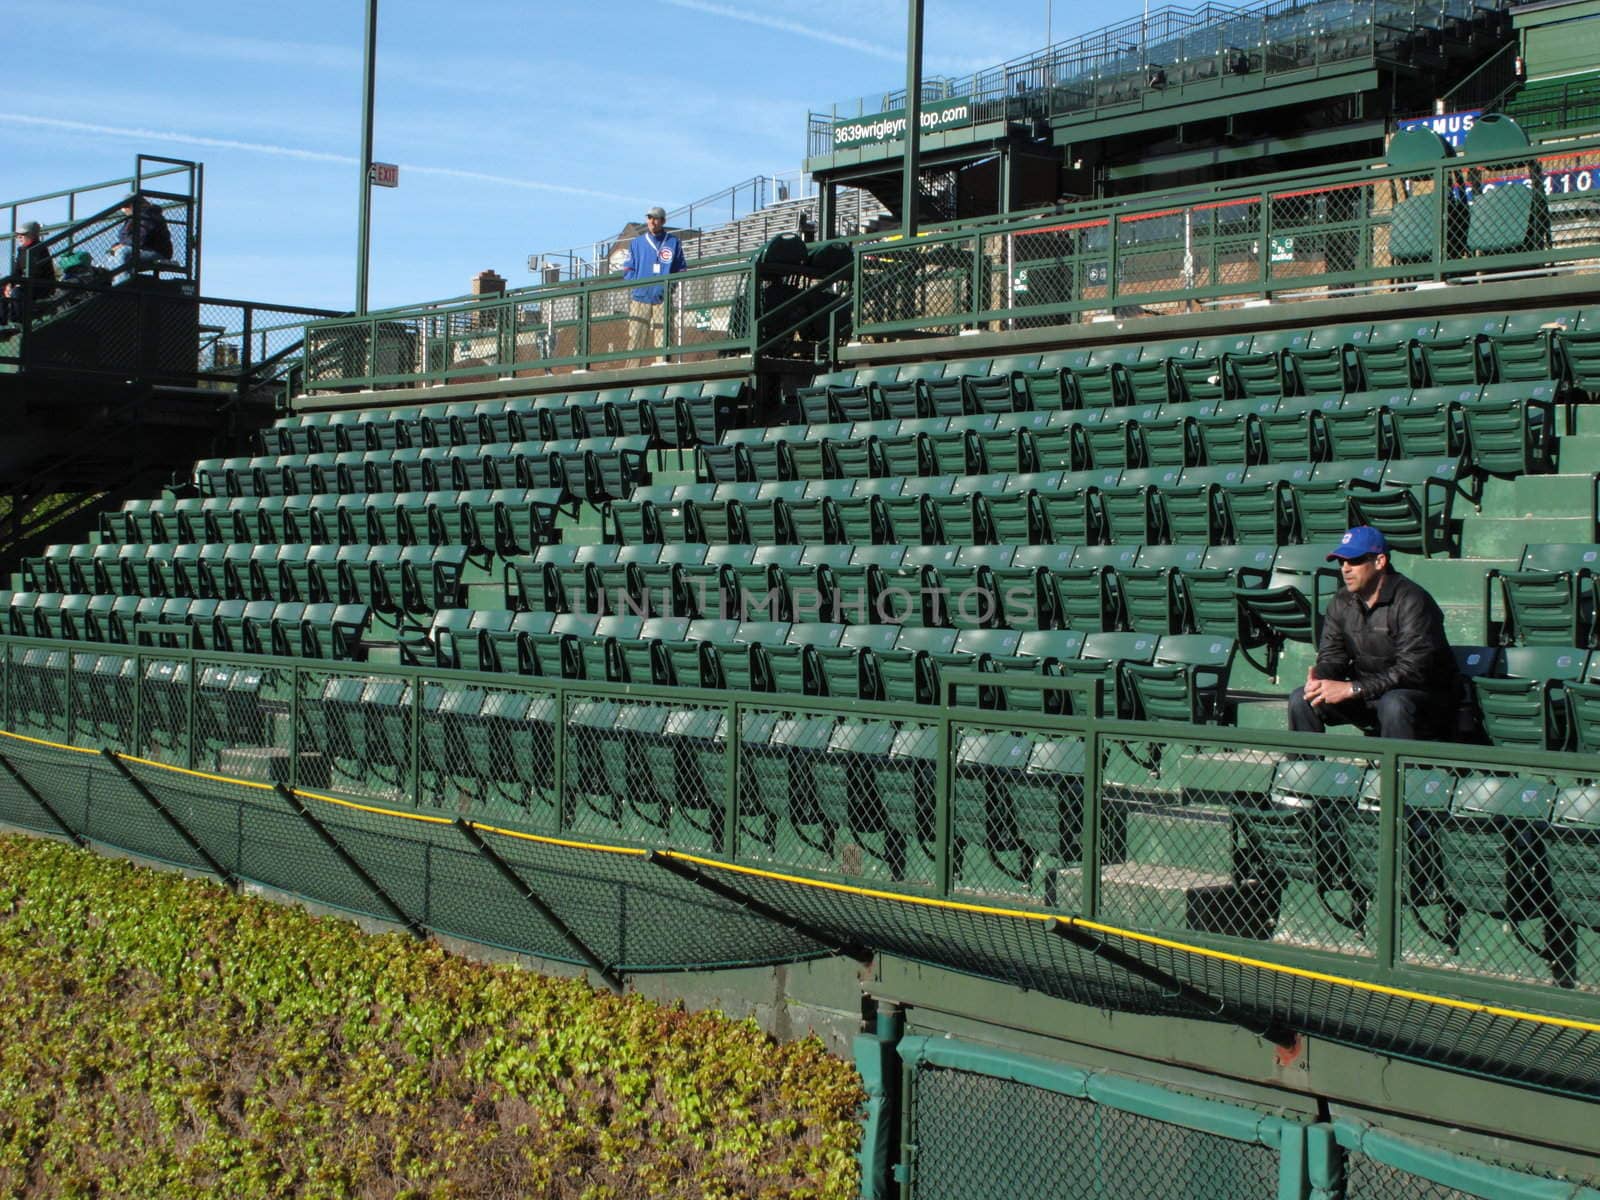 First Cubs bleacher fan for a game against the Washington Nationals